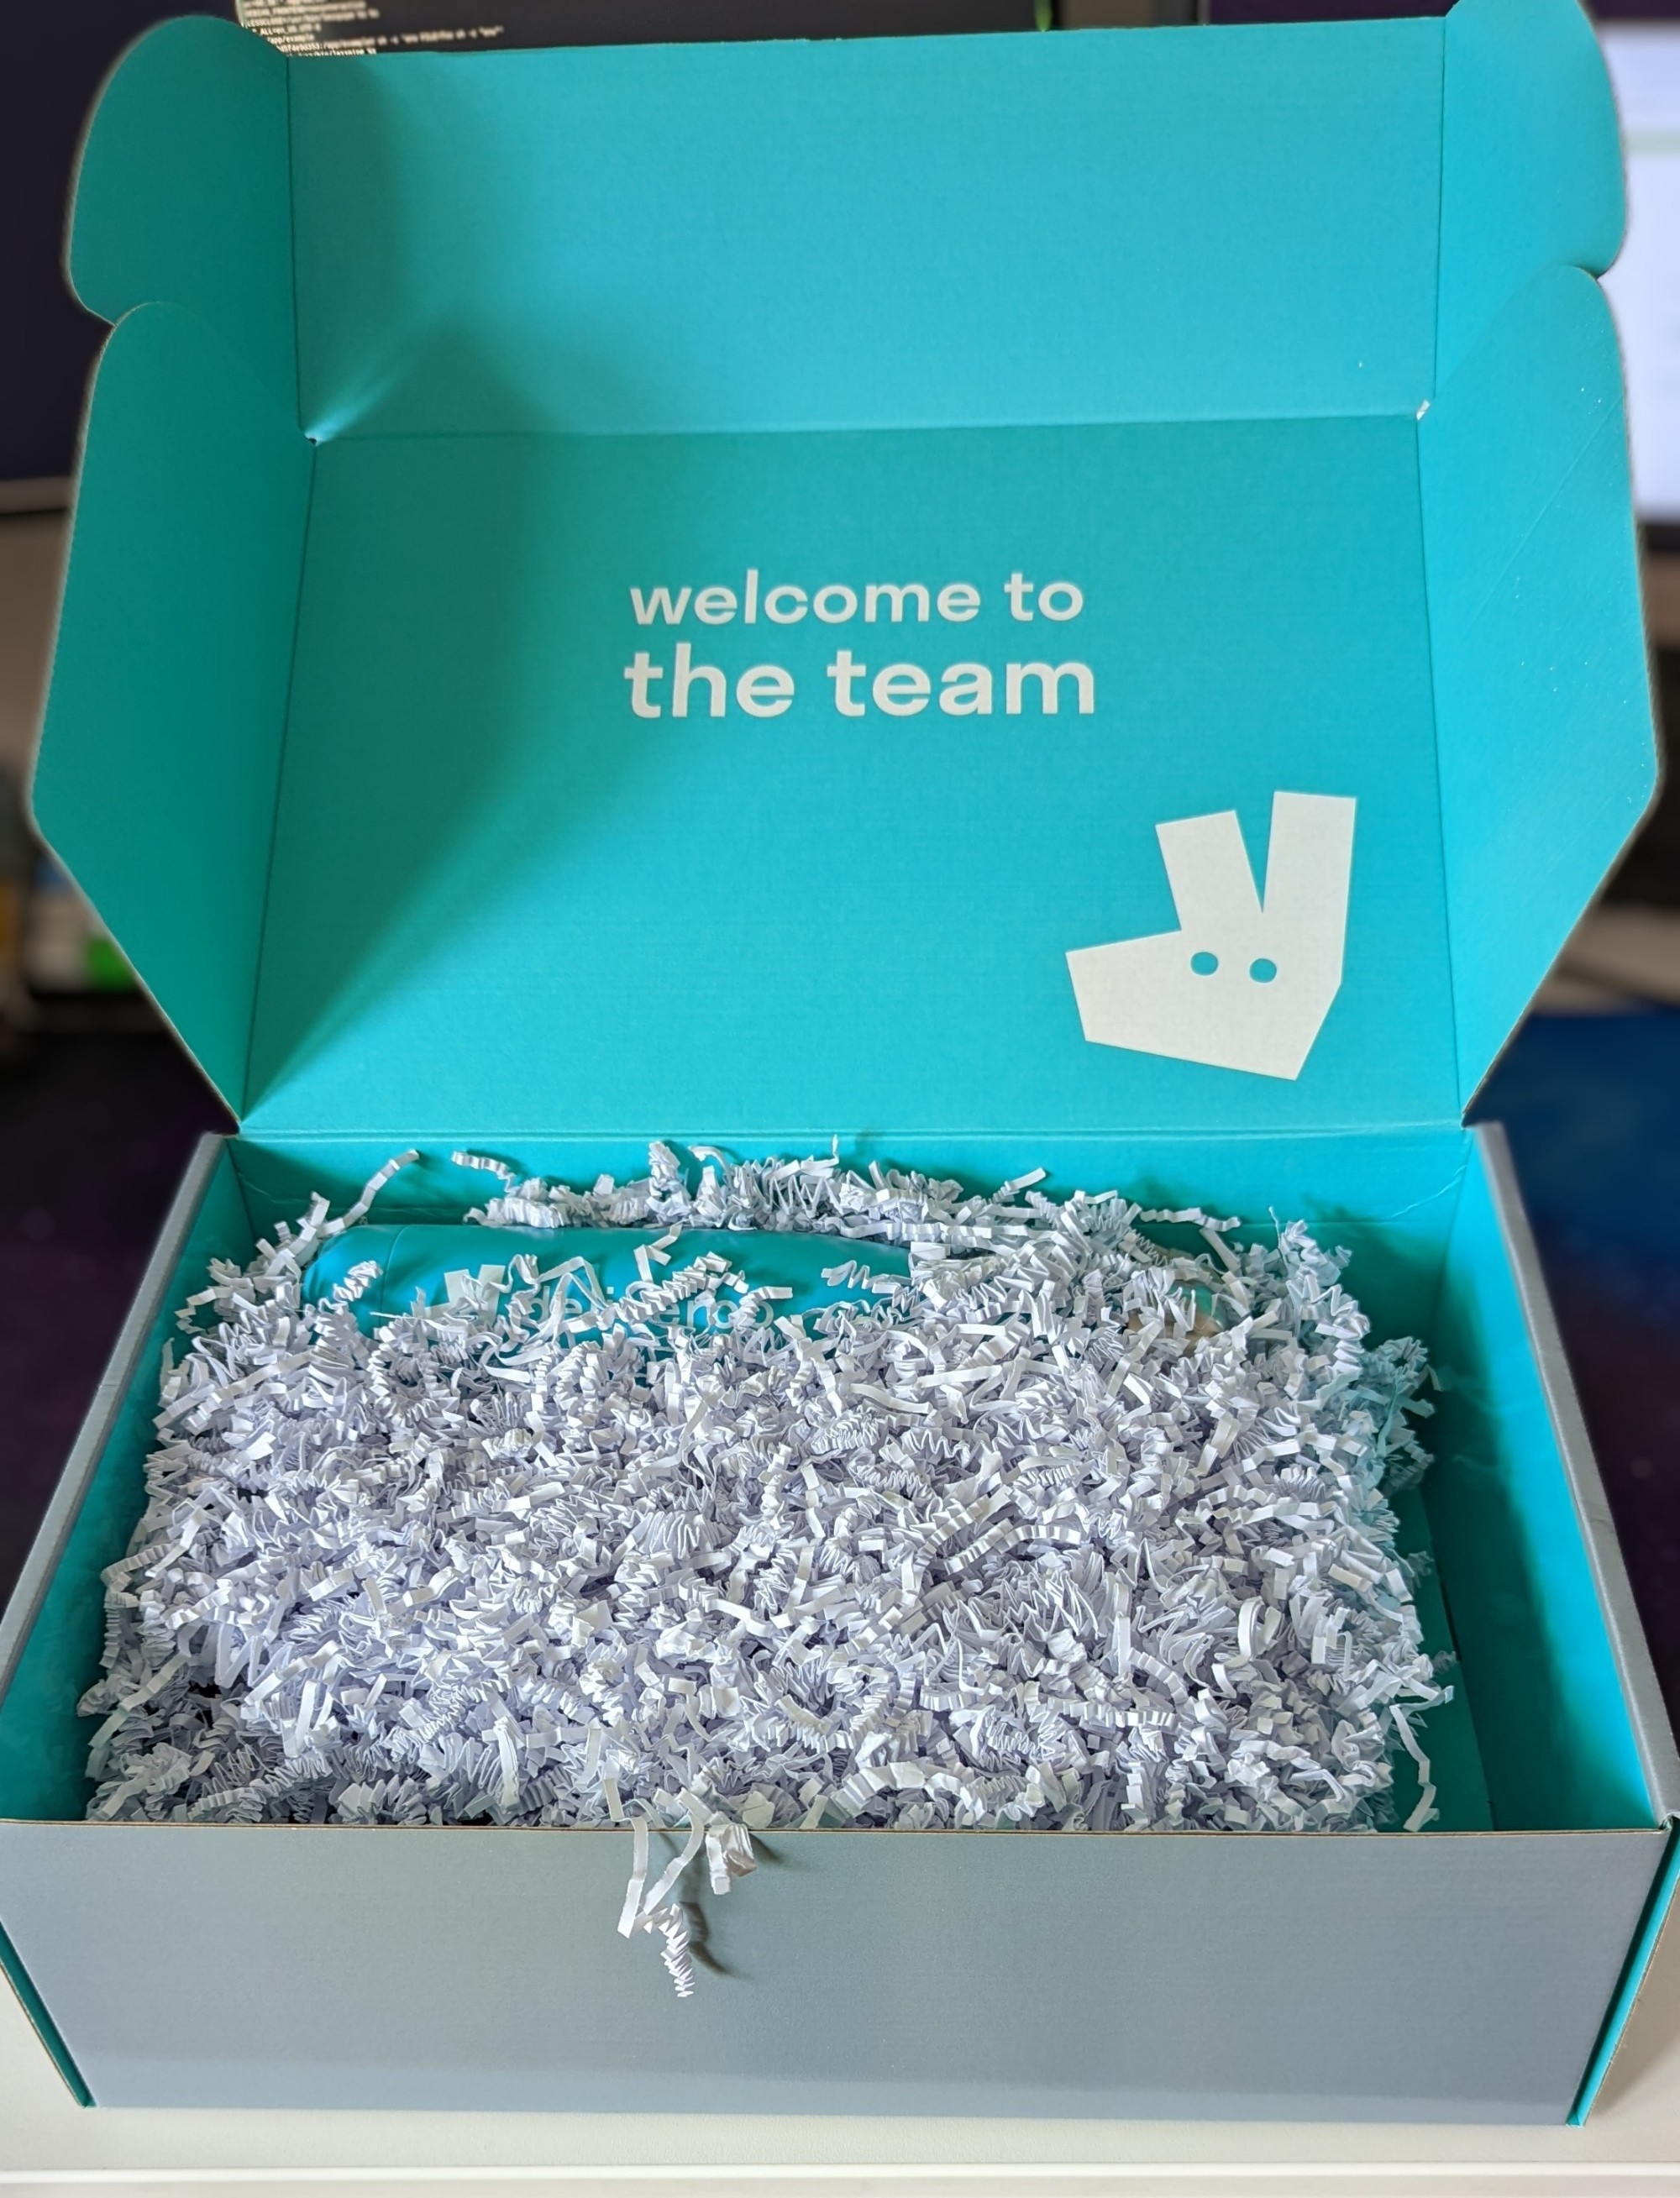 The box opened up, with "welcome to the team" on the inside lid, and swag inside covered with tasteful paper packing material. The inside of the box is Deliveroo blue